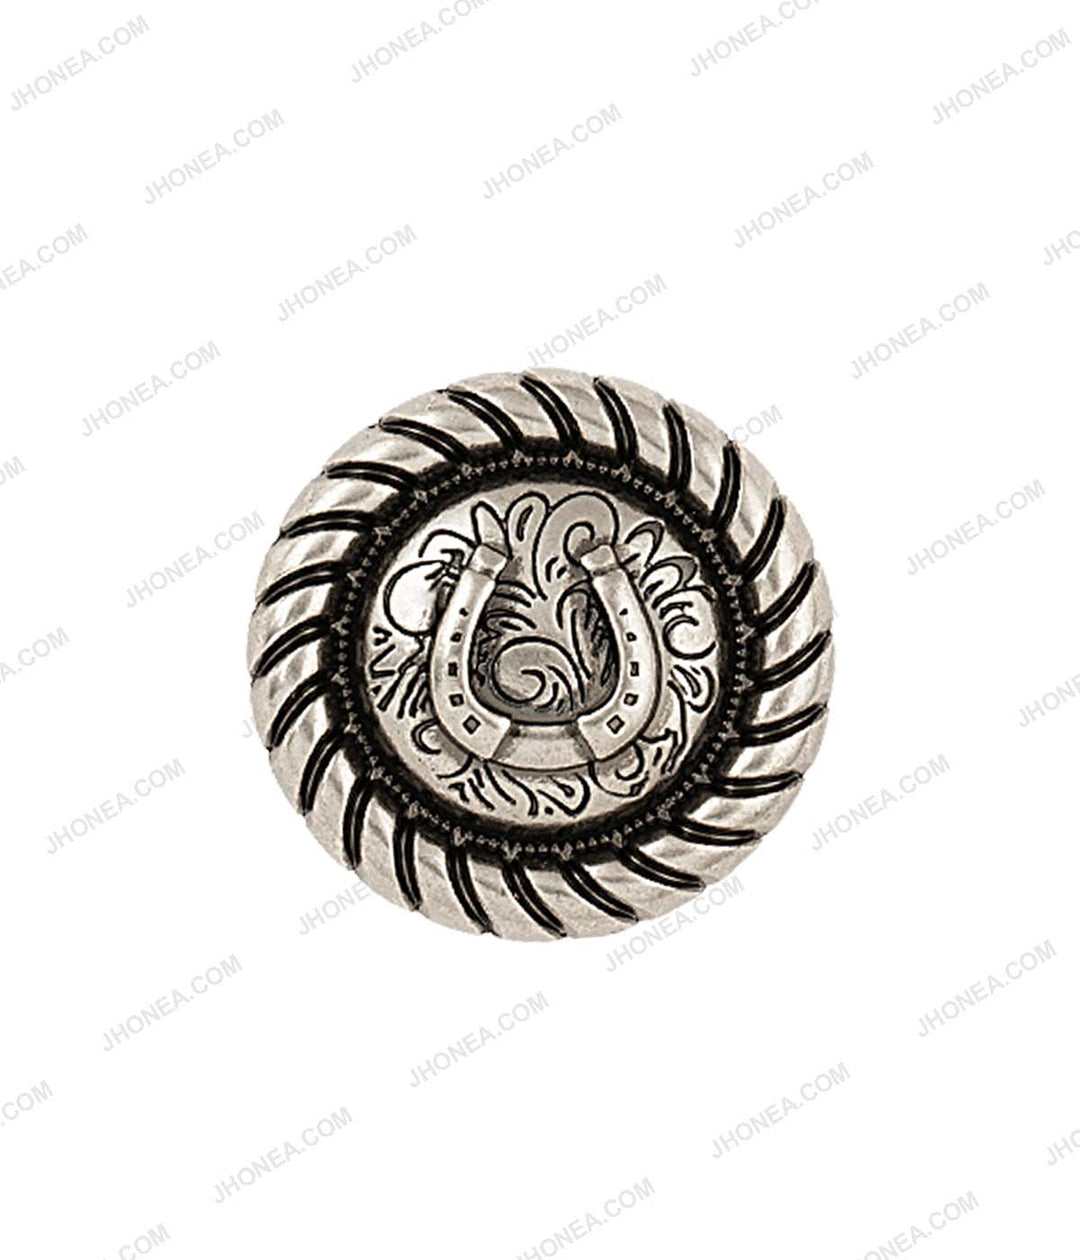 Horse-shoe Design Indo-Western Style Antique Metal Buttons